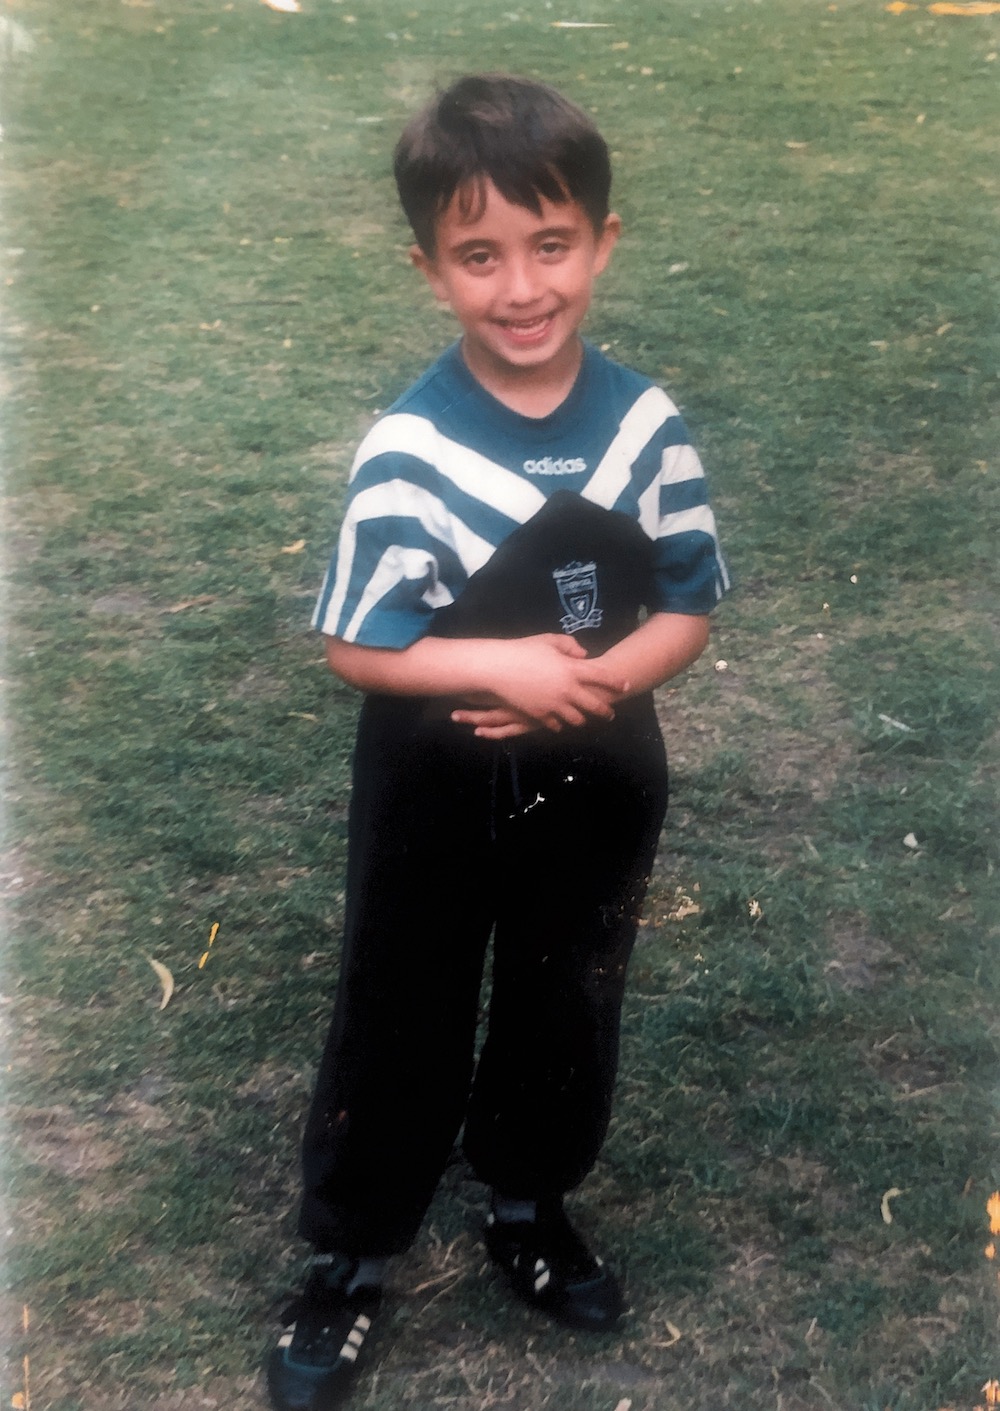 Din Havolli as a child, wearing his Liverpool shirt. Image courtesy of the author